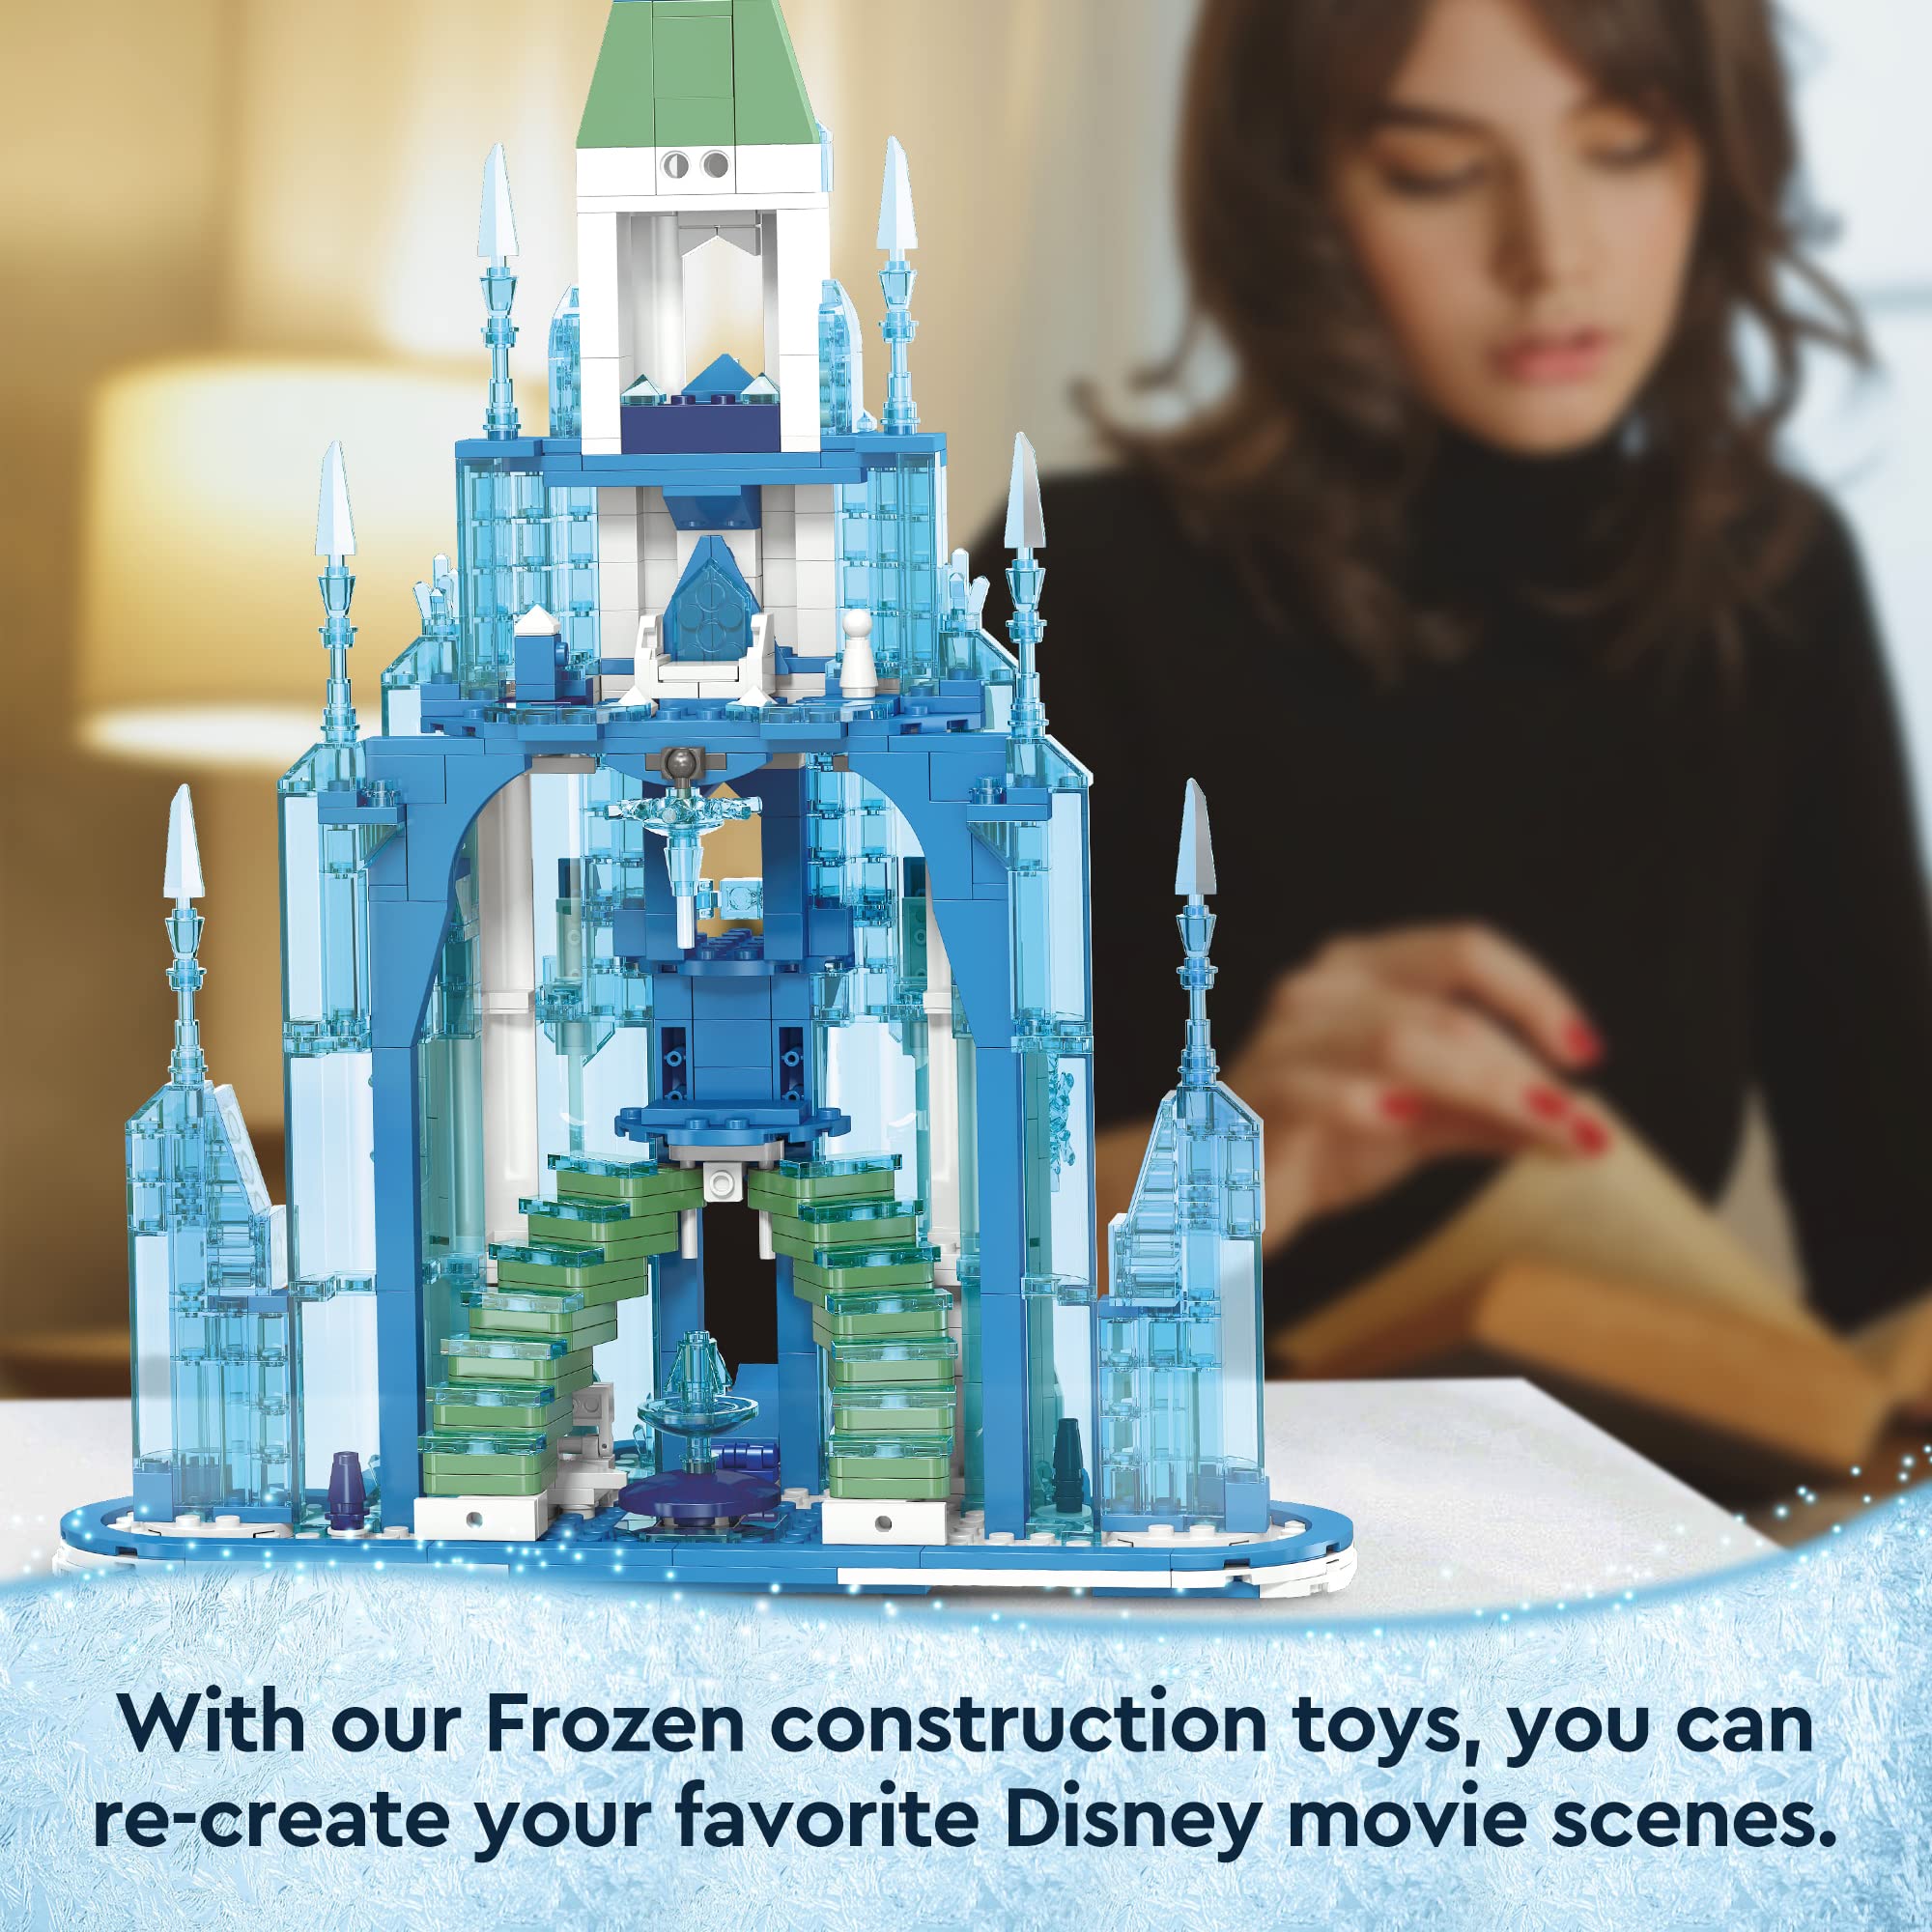 EDUCIRO Friends Frozen Ice Castle Building Girls Toys (671 Pieces), Princess Toys House for Girl, Birthday Gift Idea with Girls, Boys, and Kids Aged 7 Years Old+